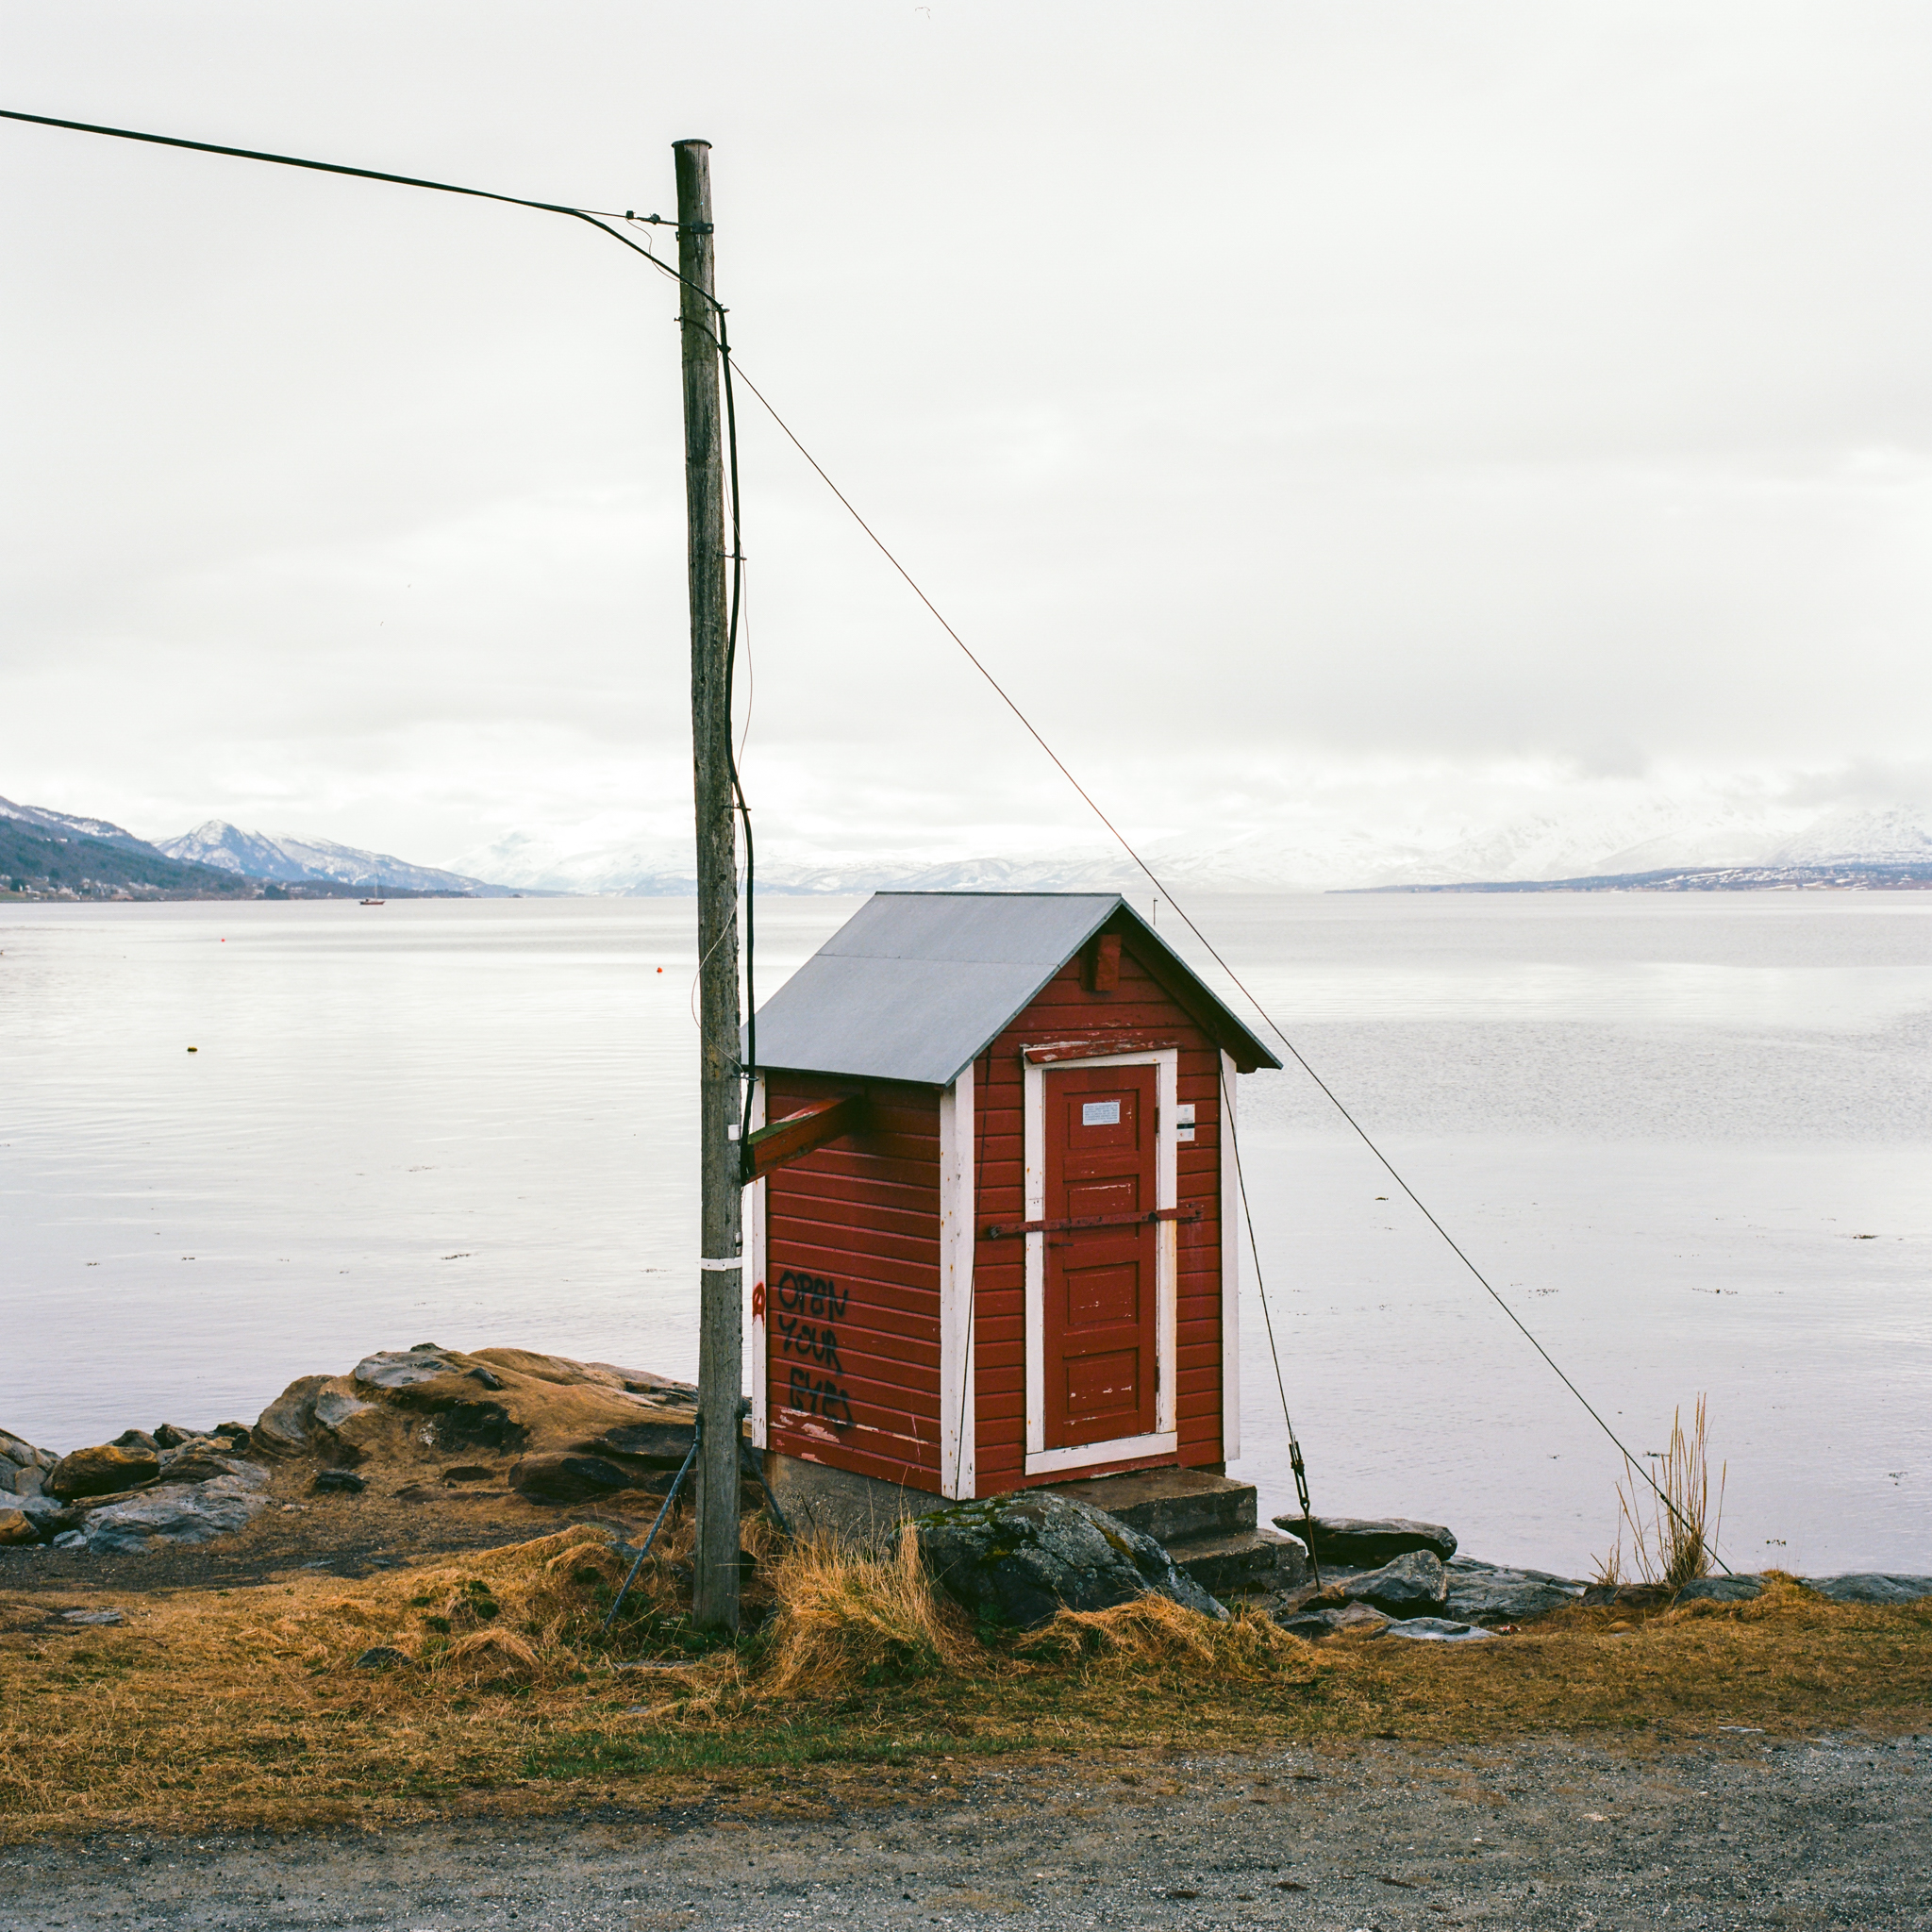 A tiny wooden shack spray painted open your eyes, overlooking the water outside Tromsø with the mountains in the distance